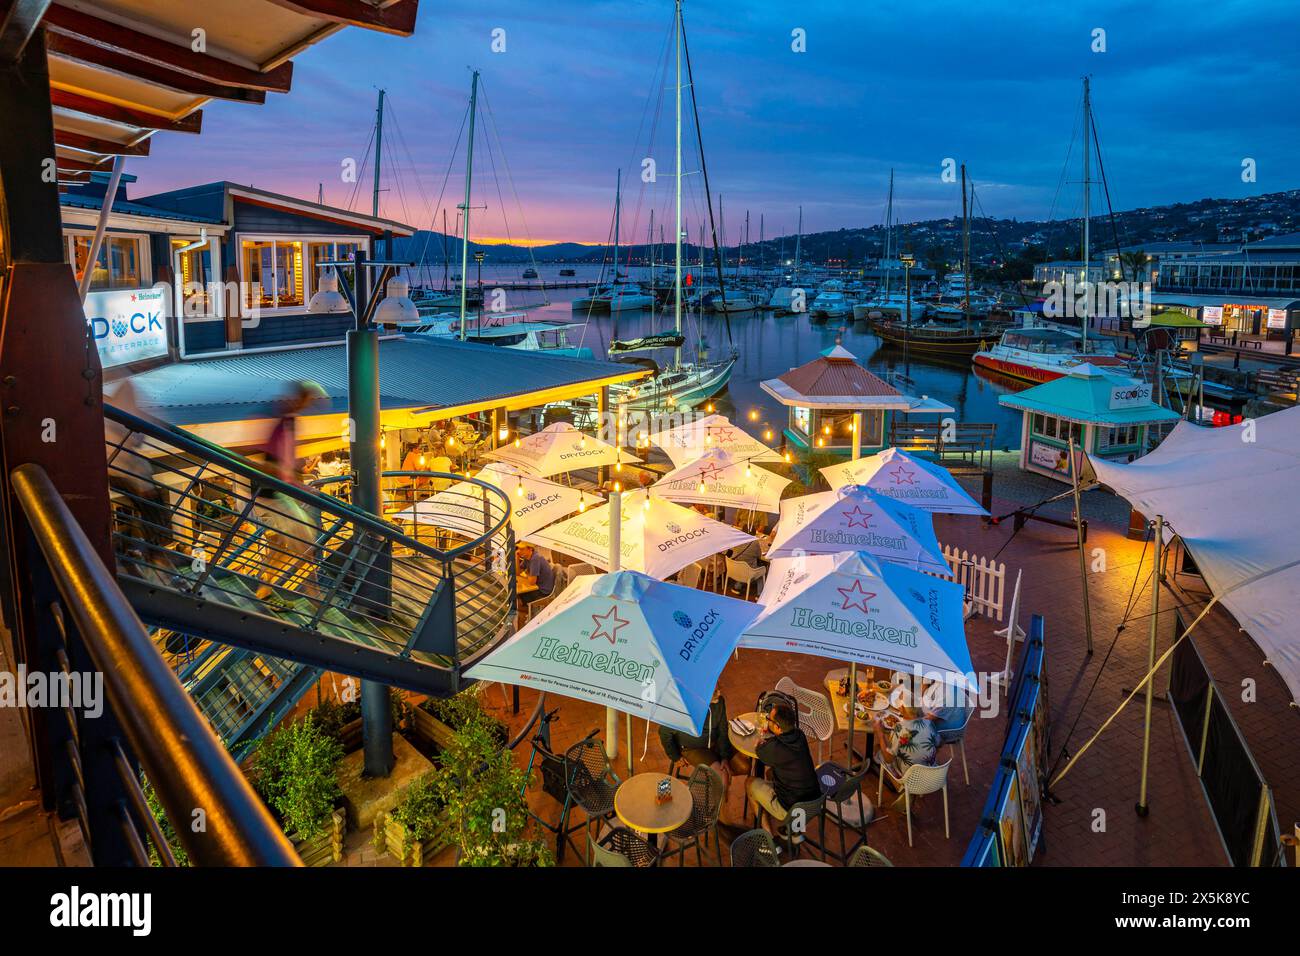 View of boats and restaurants at Knysna Waterfront at dusk, Knysna, Western Cape Province, South Africa, Africa Copyright: FrankxFell 844-33434 Stock Photo